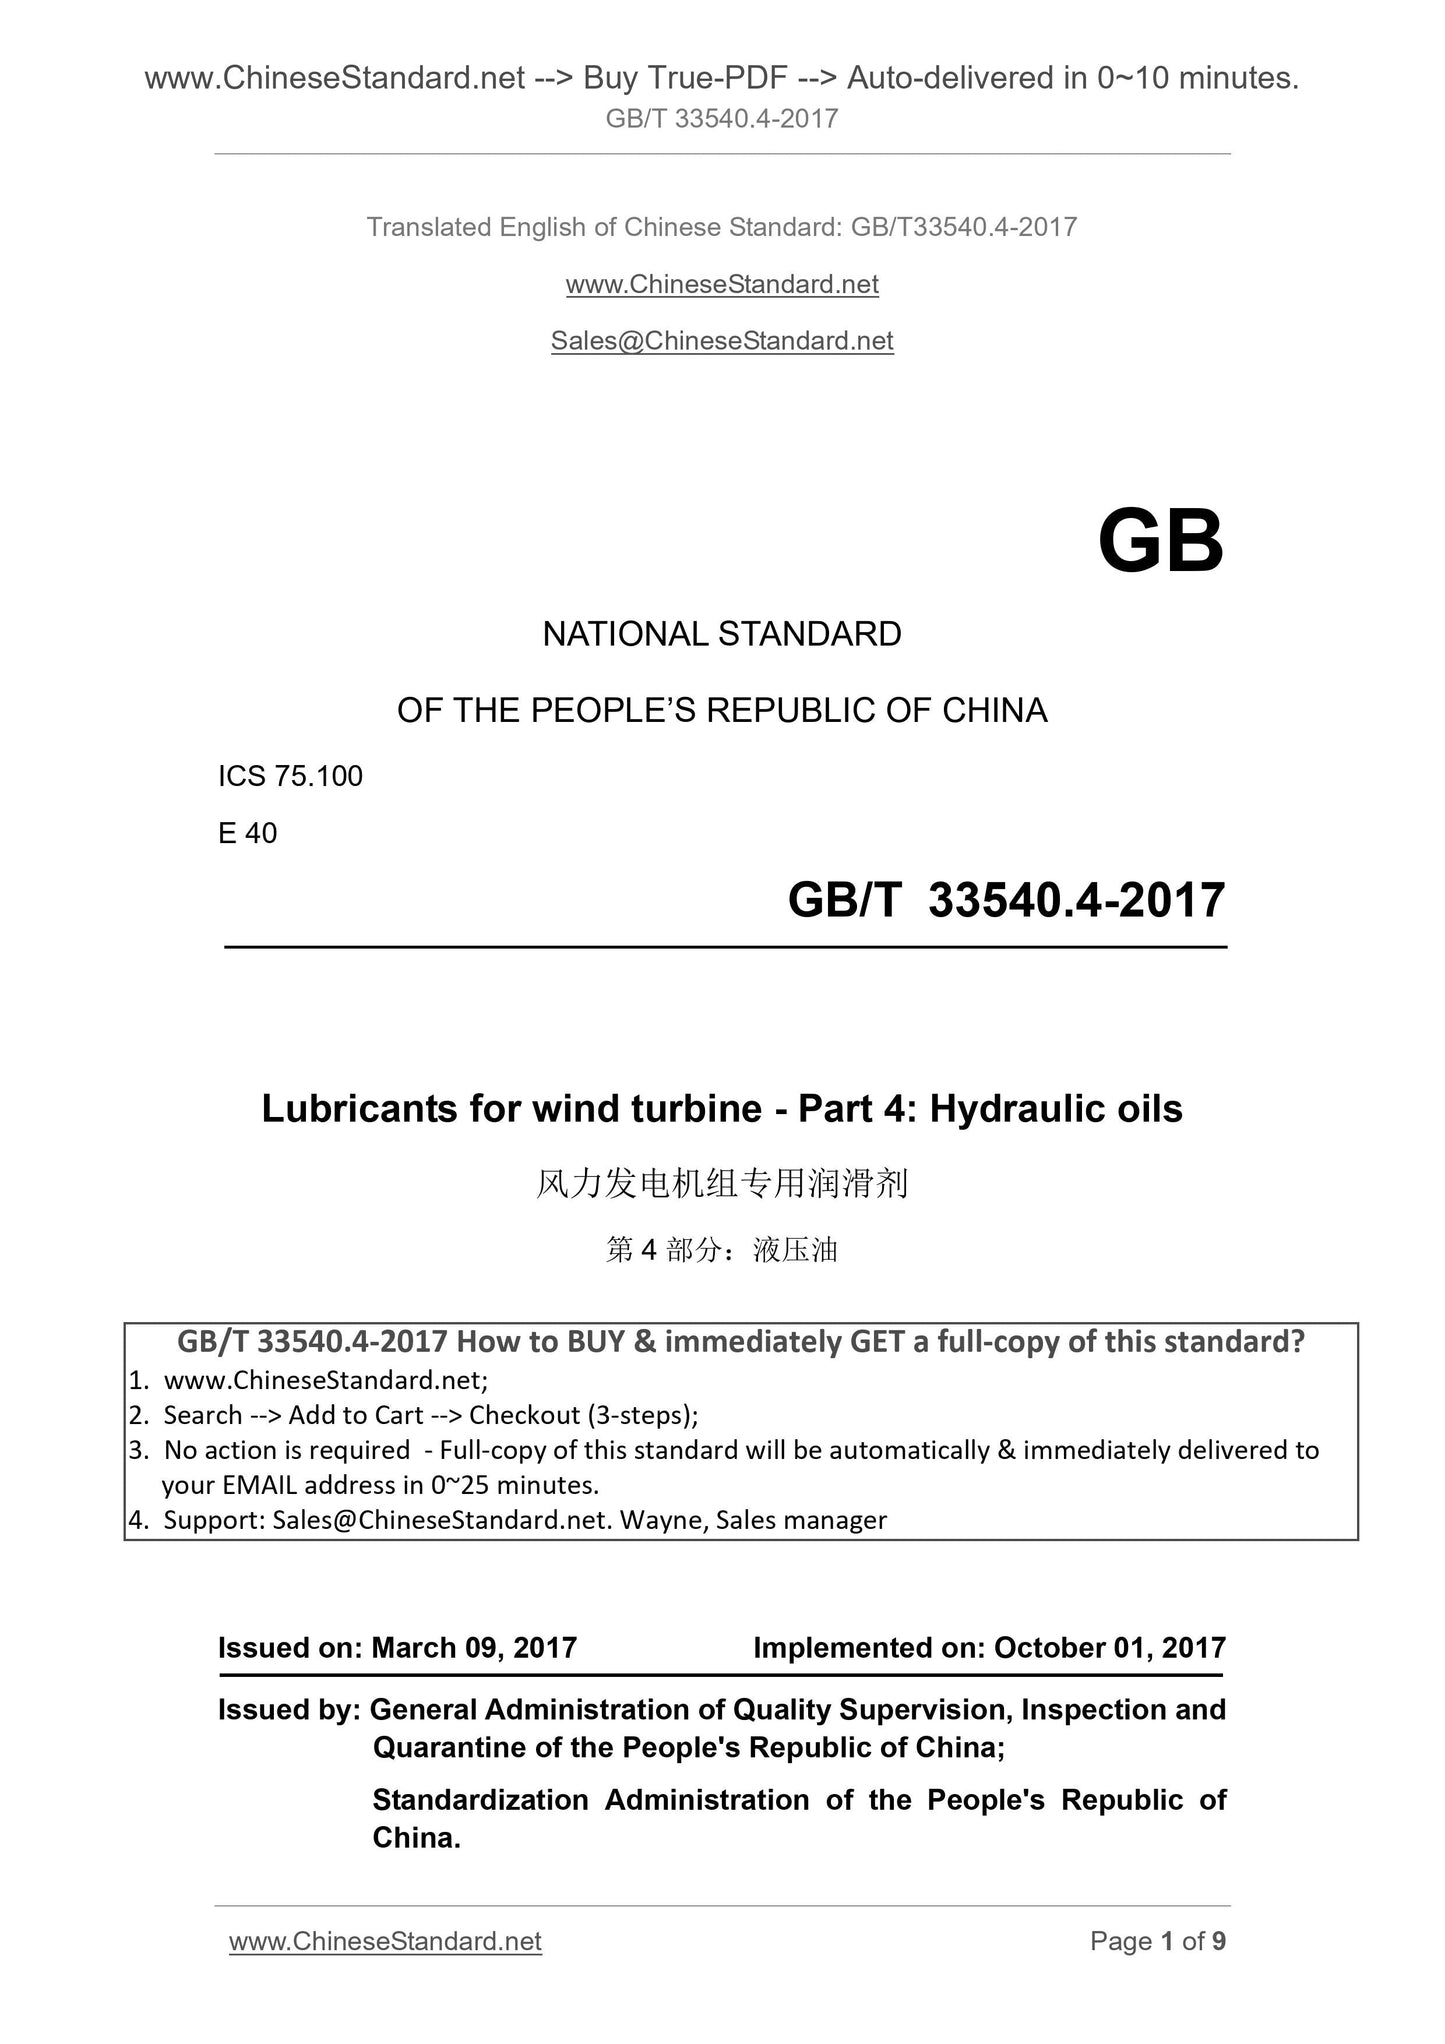 GB/T 33540.4-2017 Page 1